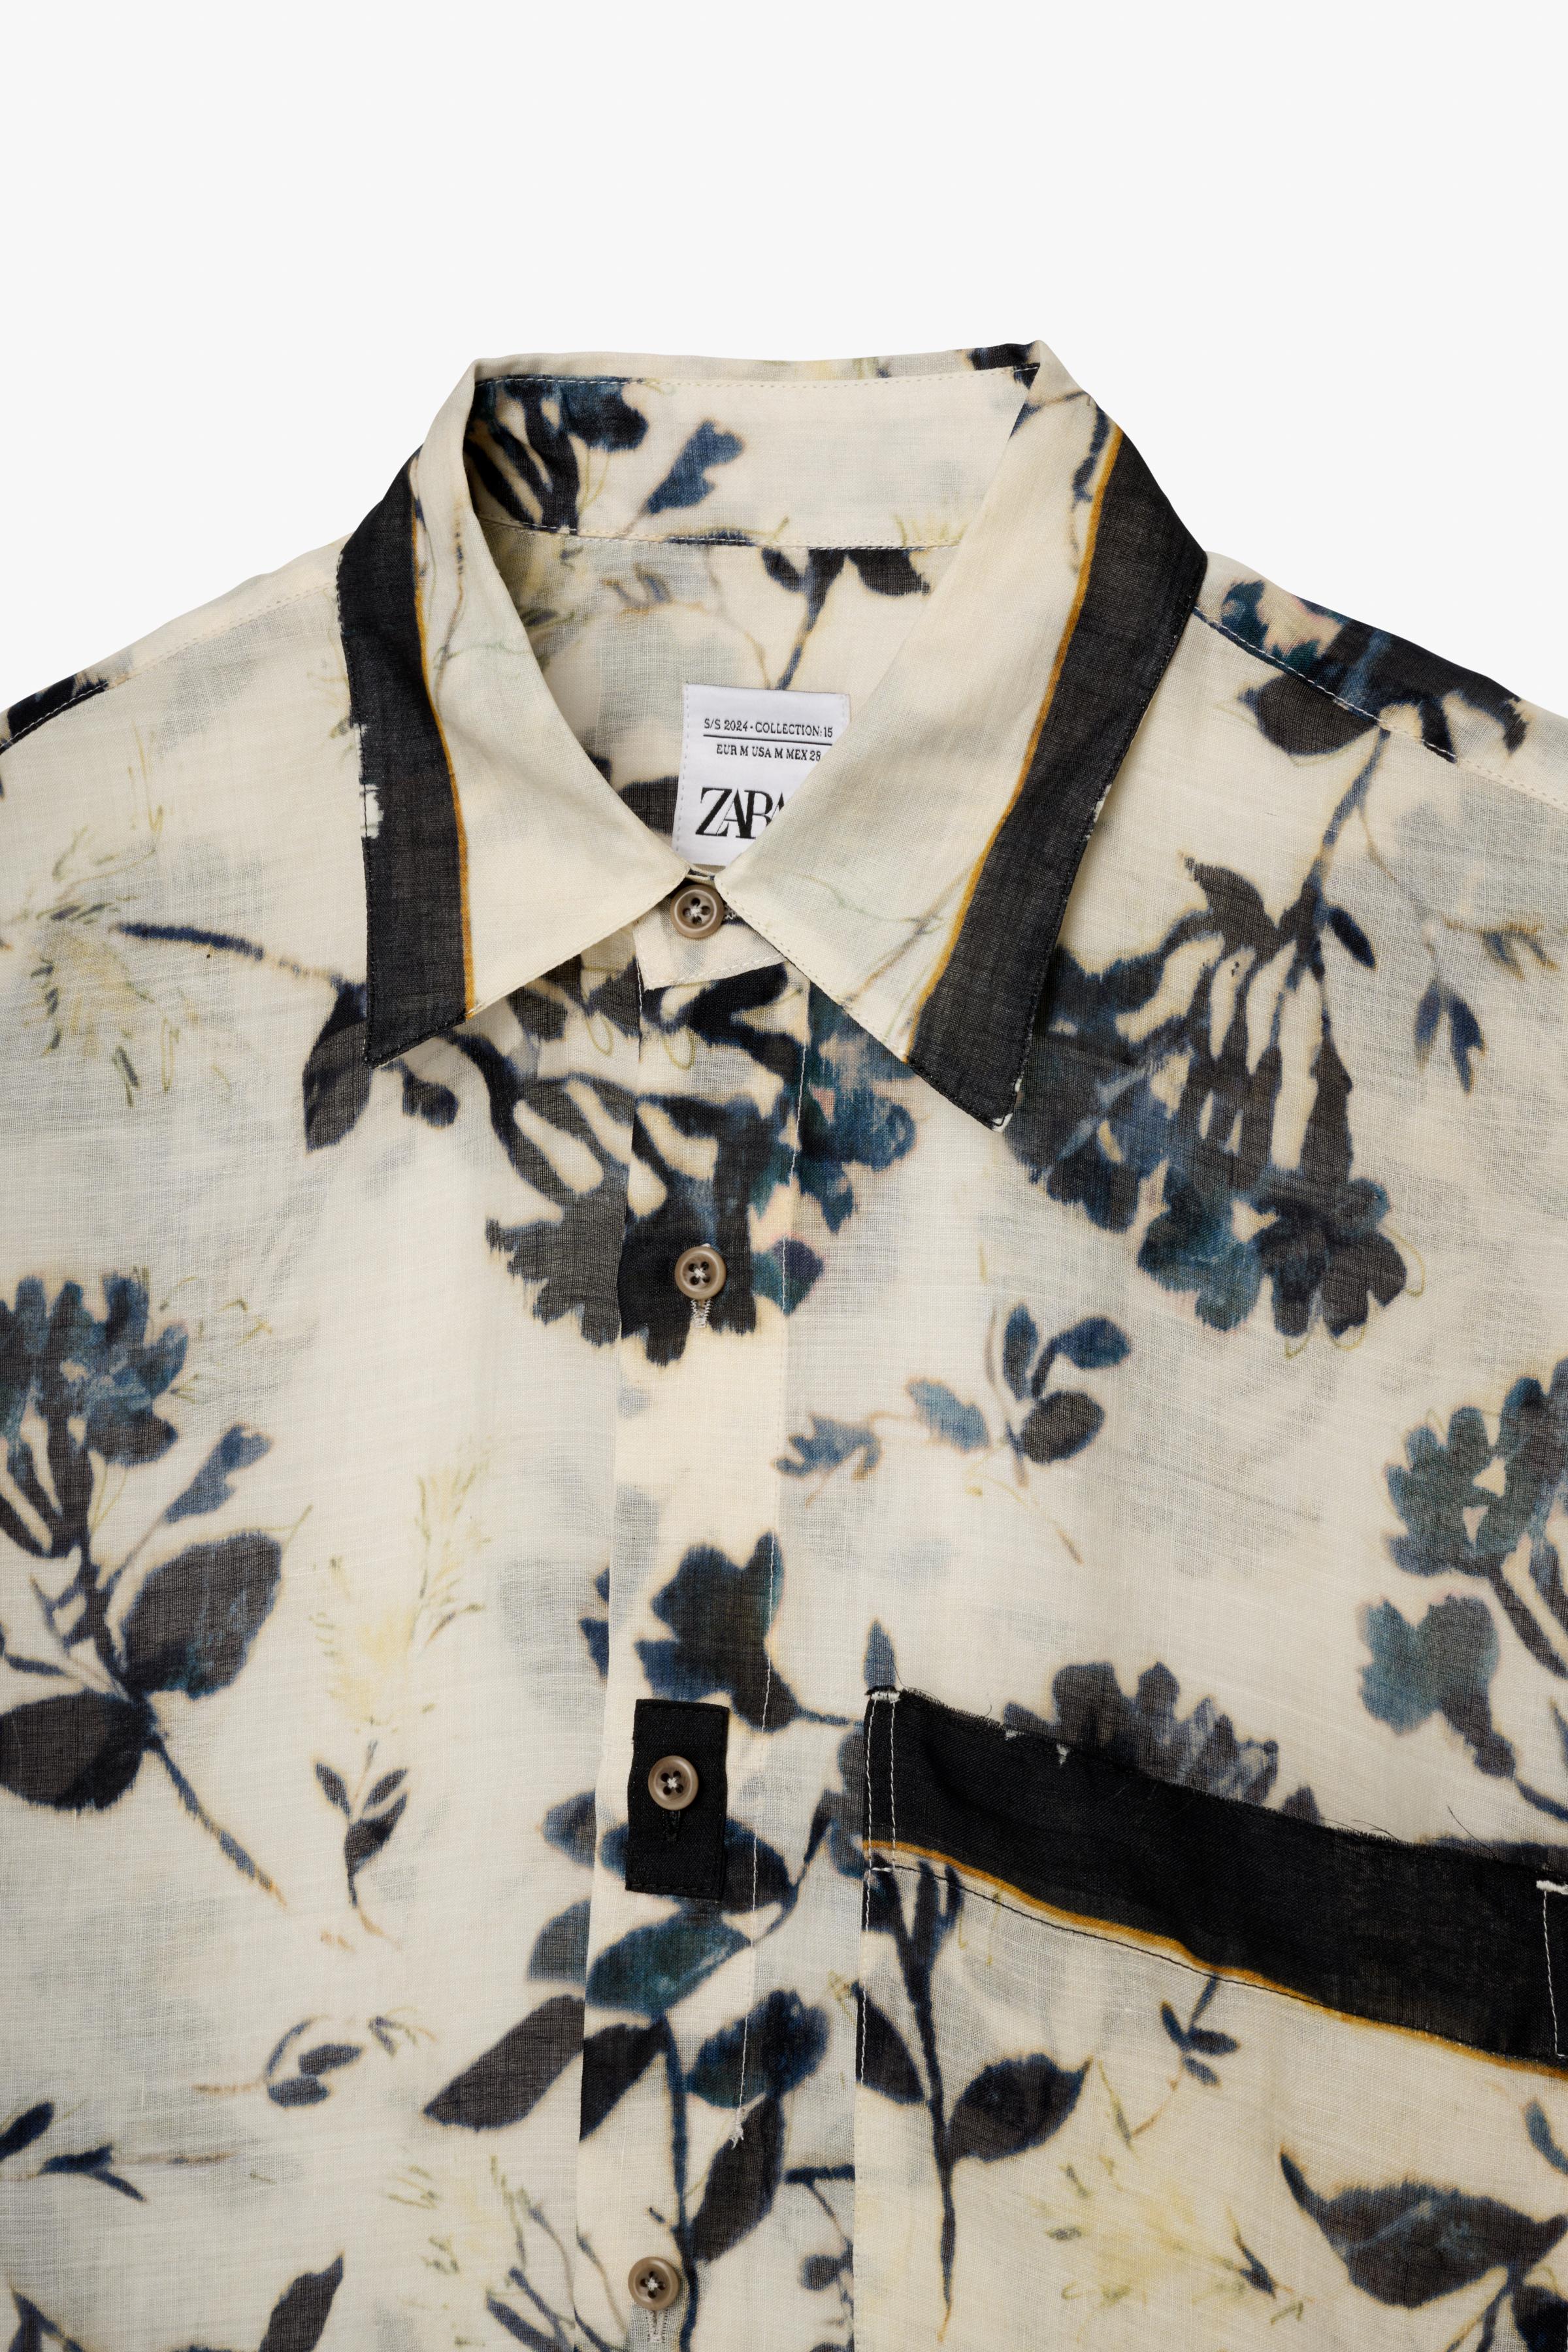 LIMITED EDITION FLORAL PRINT SHIRT